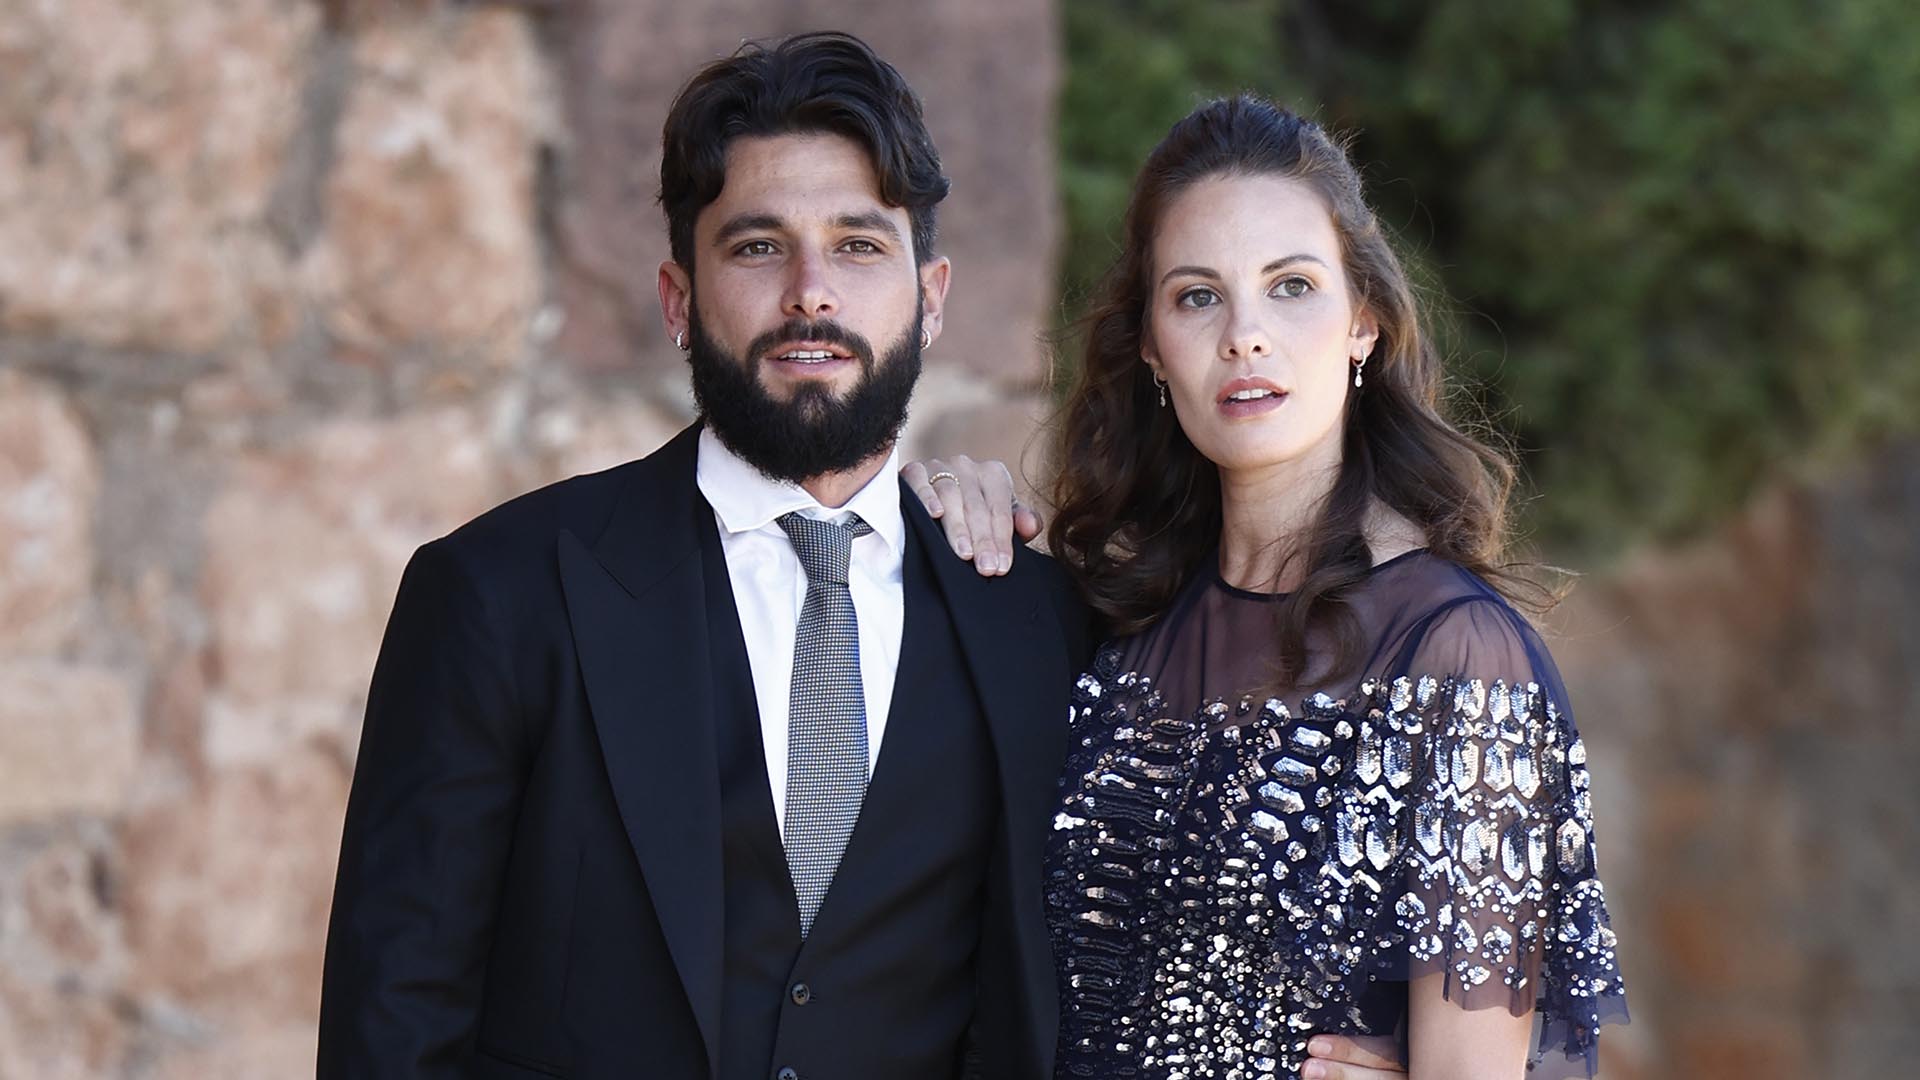 Model Jessica Bueno and soccerplayer J Peleteiro during the wedding of Daniel Carvajal and Daphne CaÃ±izares in AyllÃ³n, Segovia on Friday, June 24, 2022.